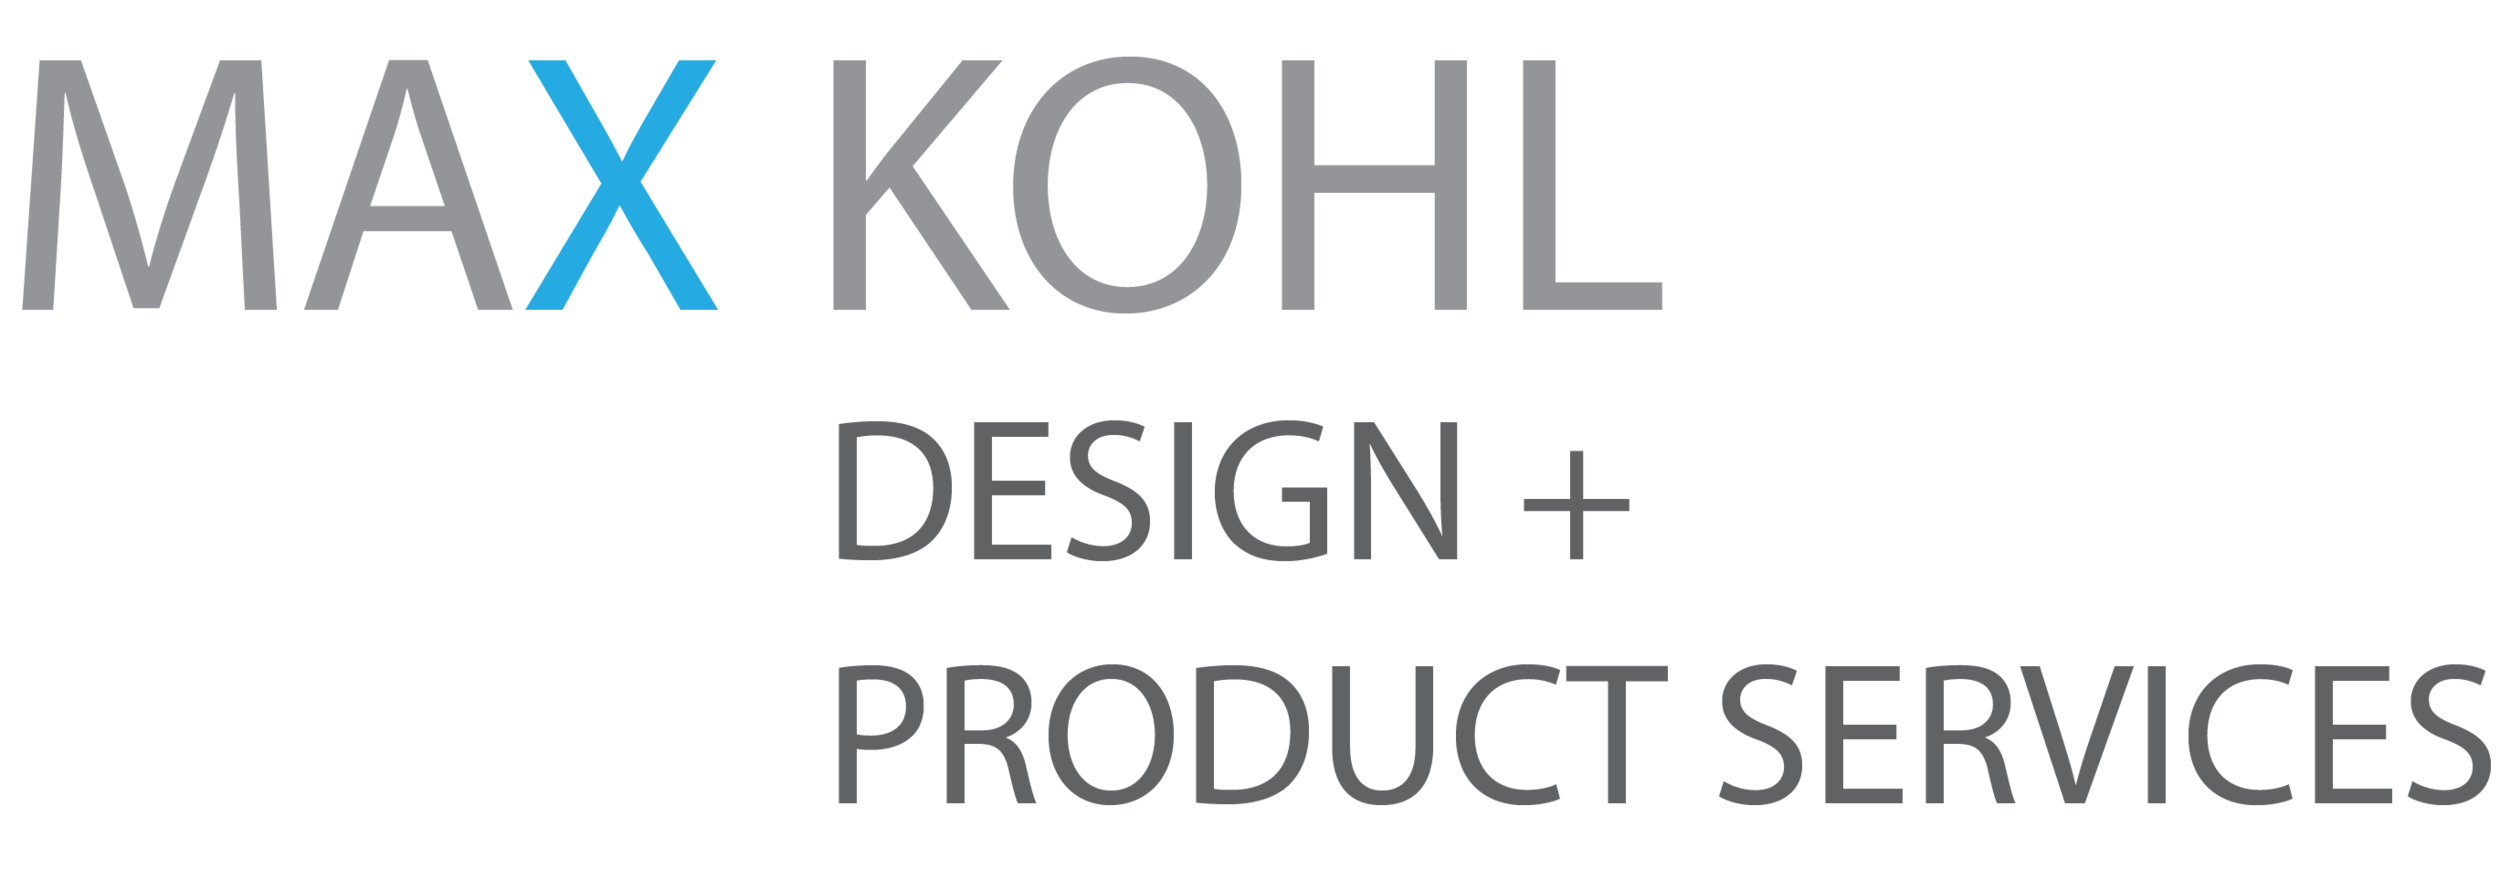 Max Kohl Design + Product Services